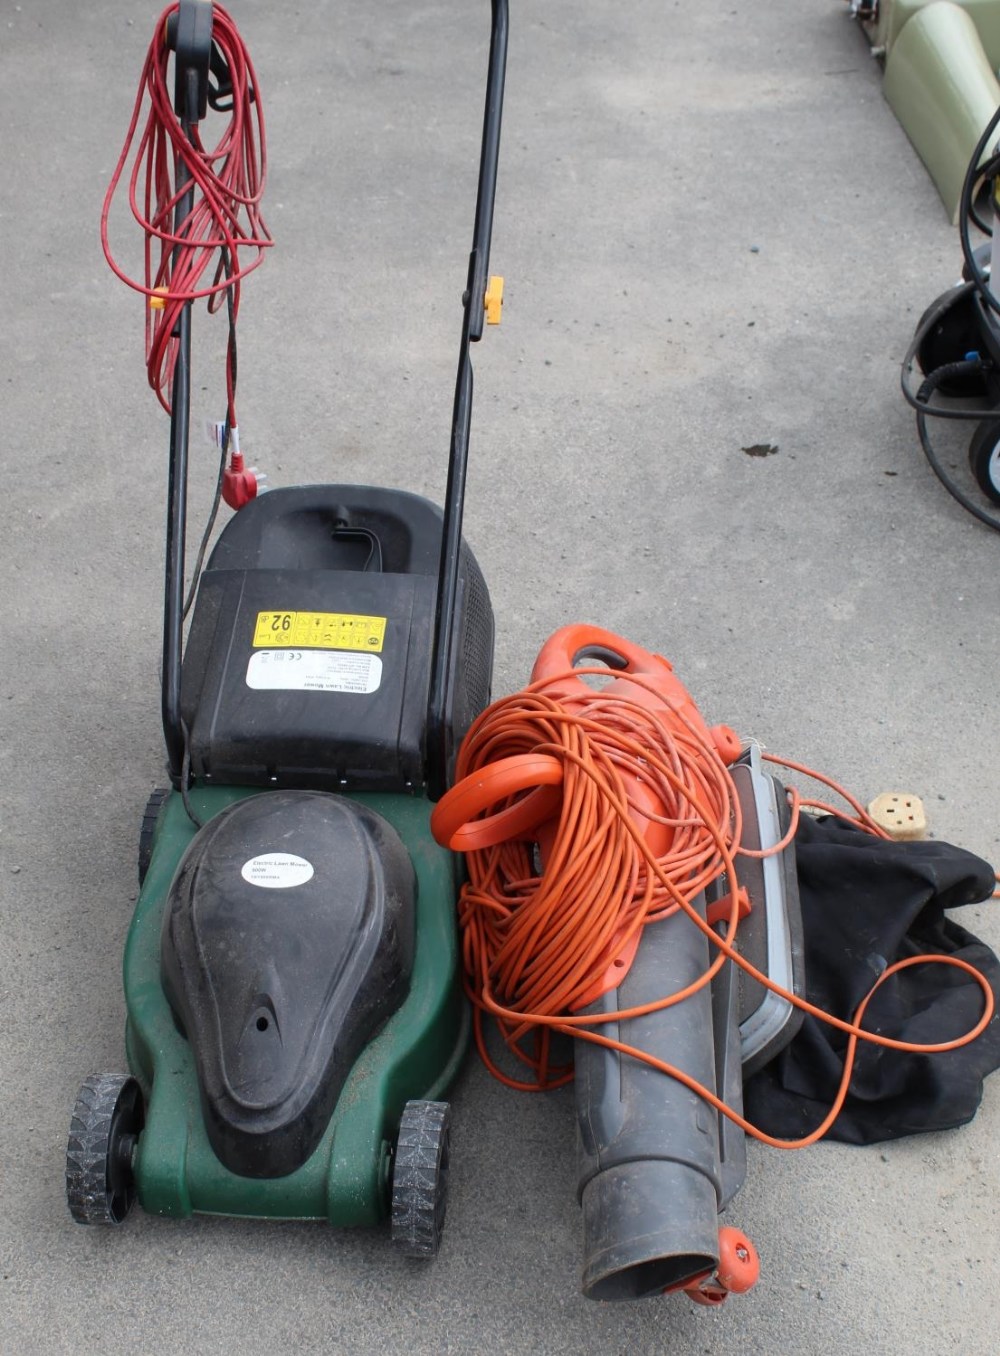 B&Q electric lawn mower and a Flymo Scirocco electric leaf blower, (A/F)